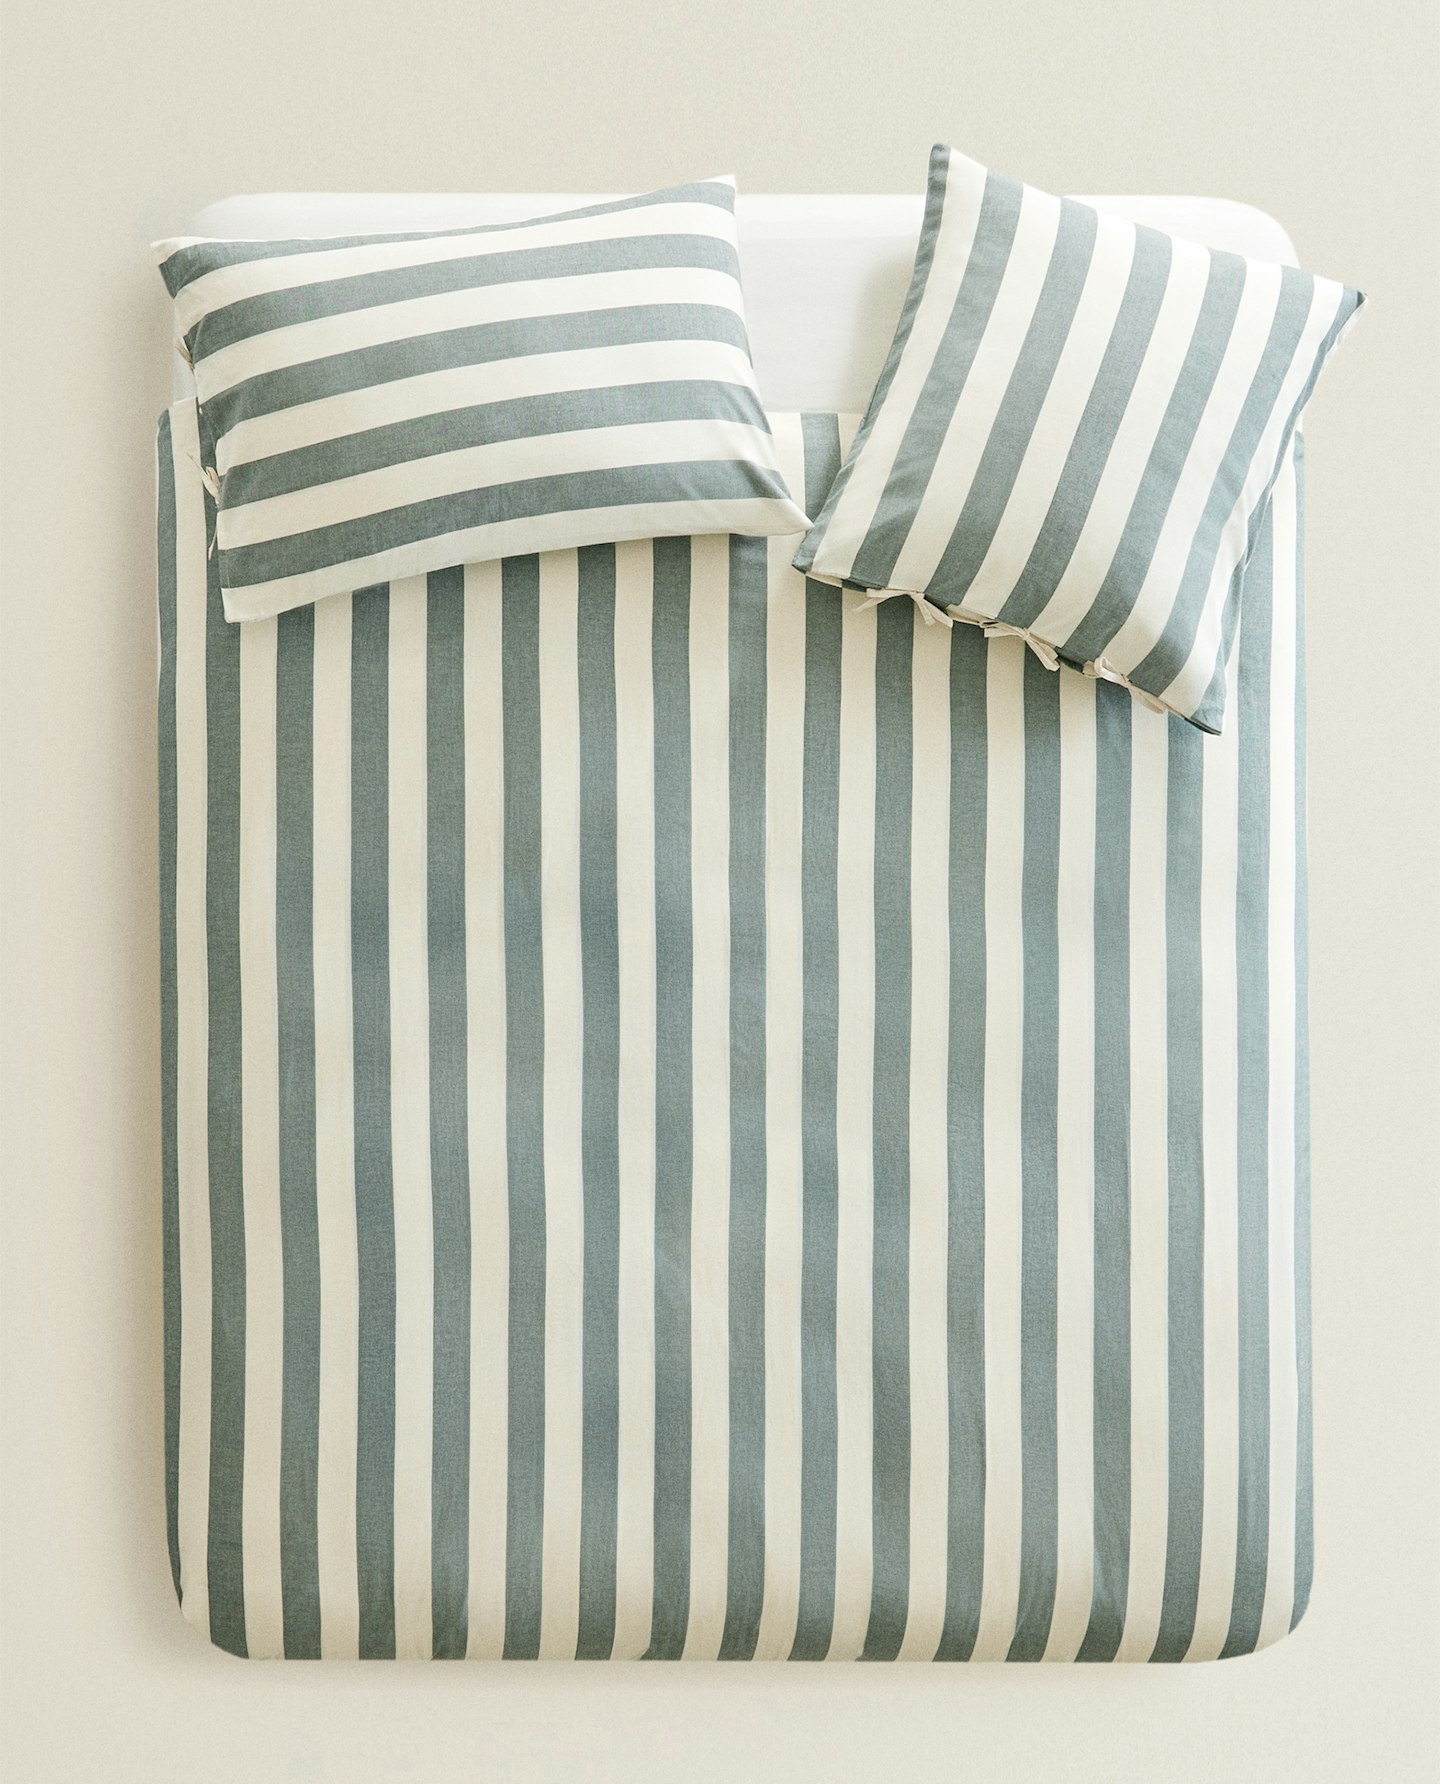 Zara Home, Dyed Thread Striped Duvet Cover, From £59.99